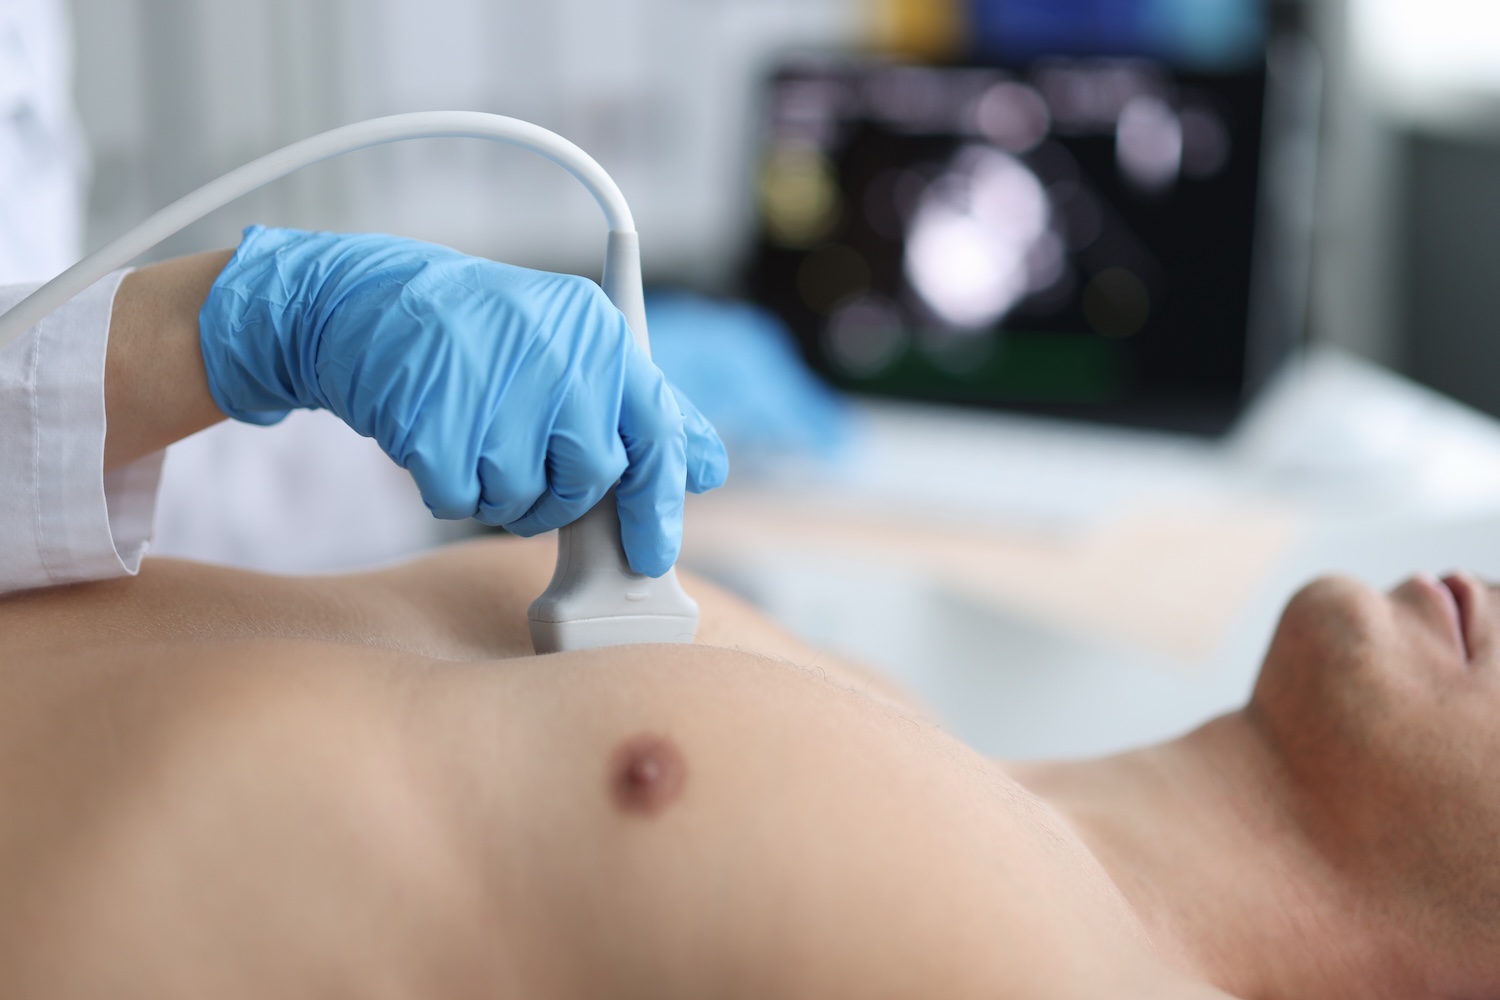 Advanced Chest ultra sounds for men and women in western Canada